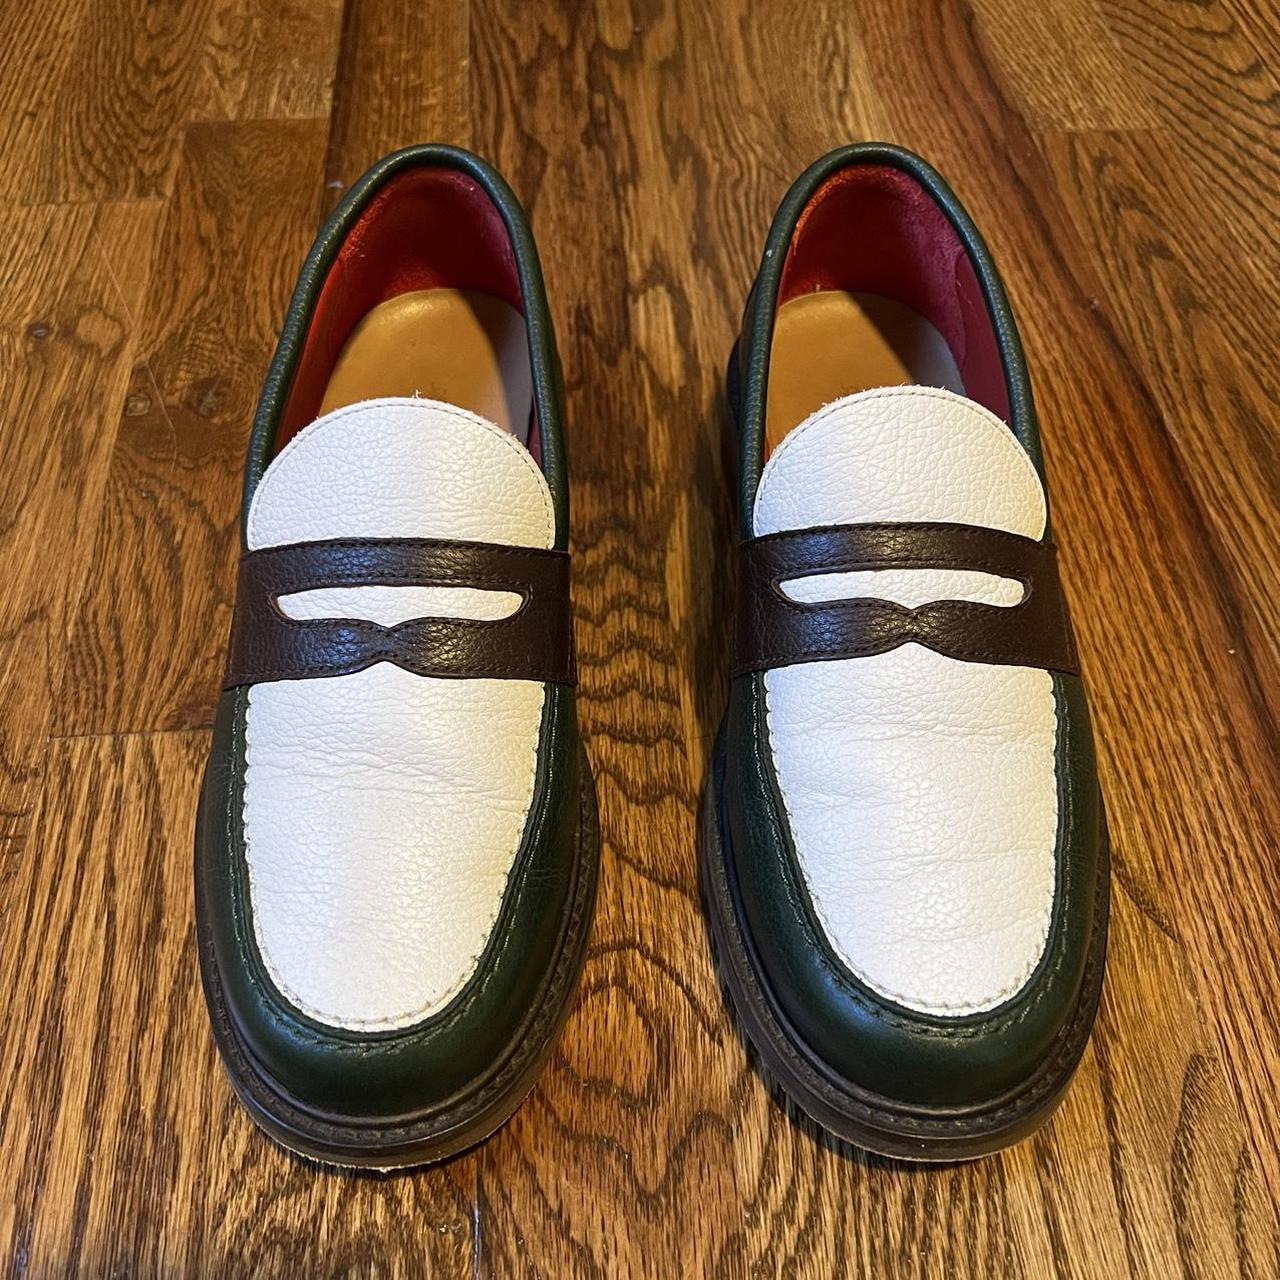 Aime Leon Dore Penny Loafers Sold out online Color... - Depop